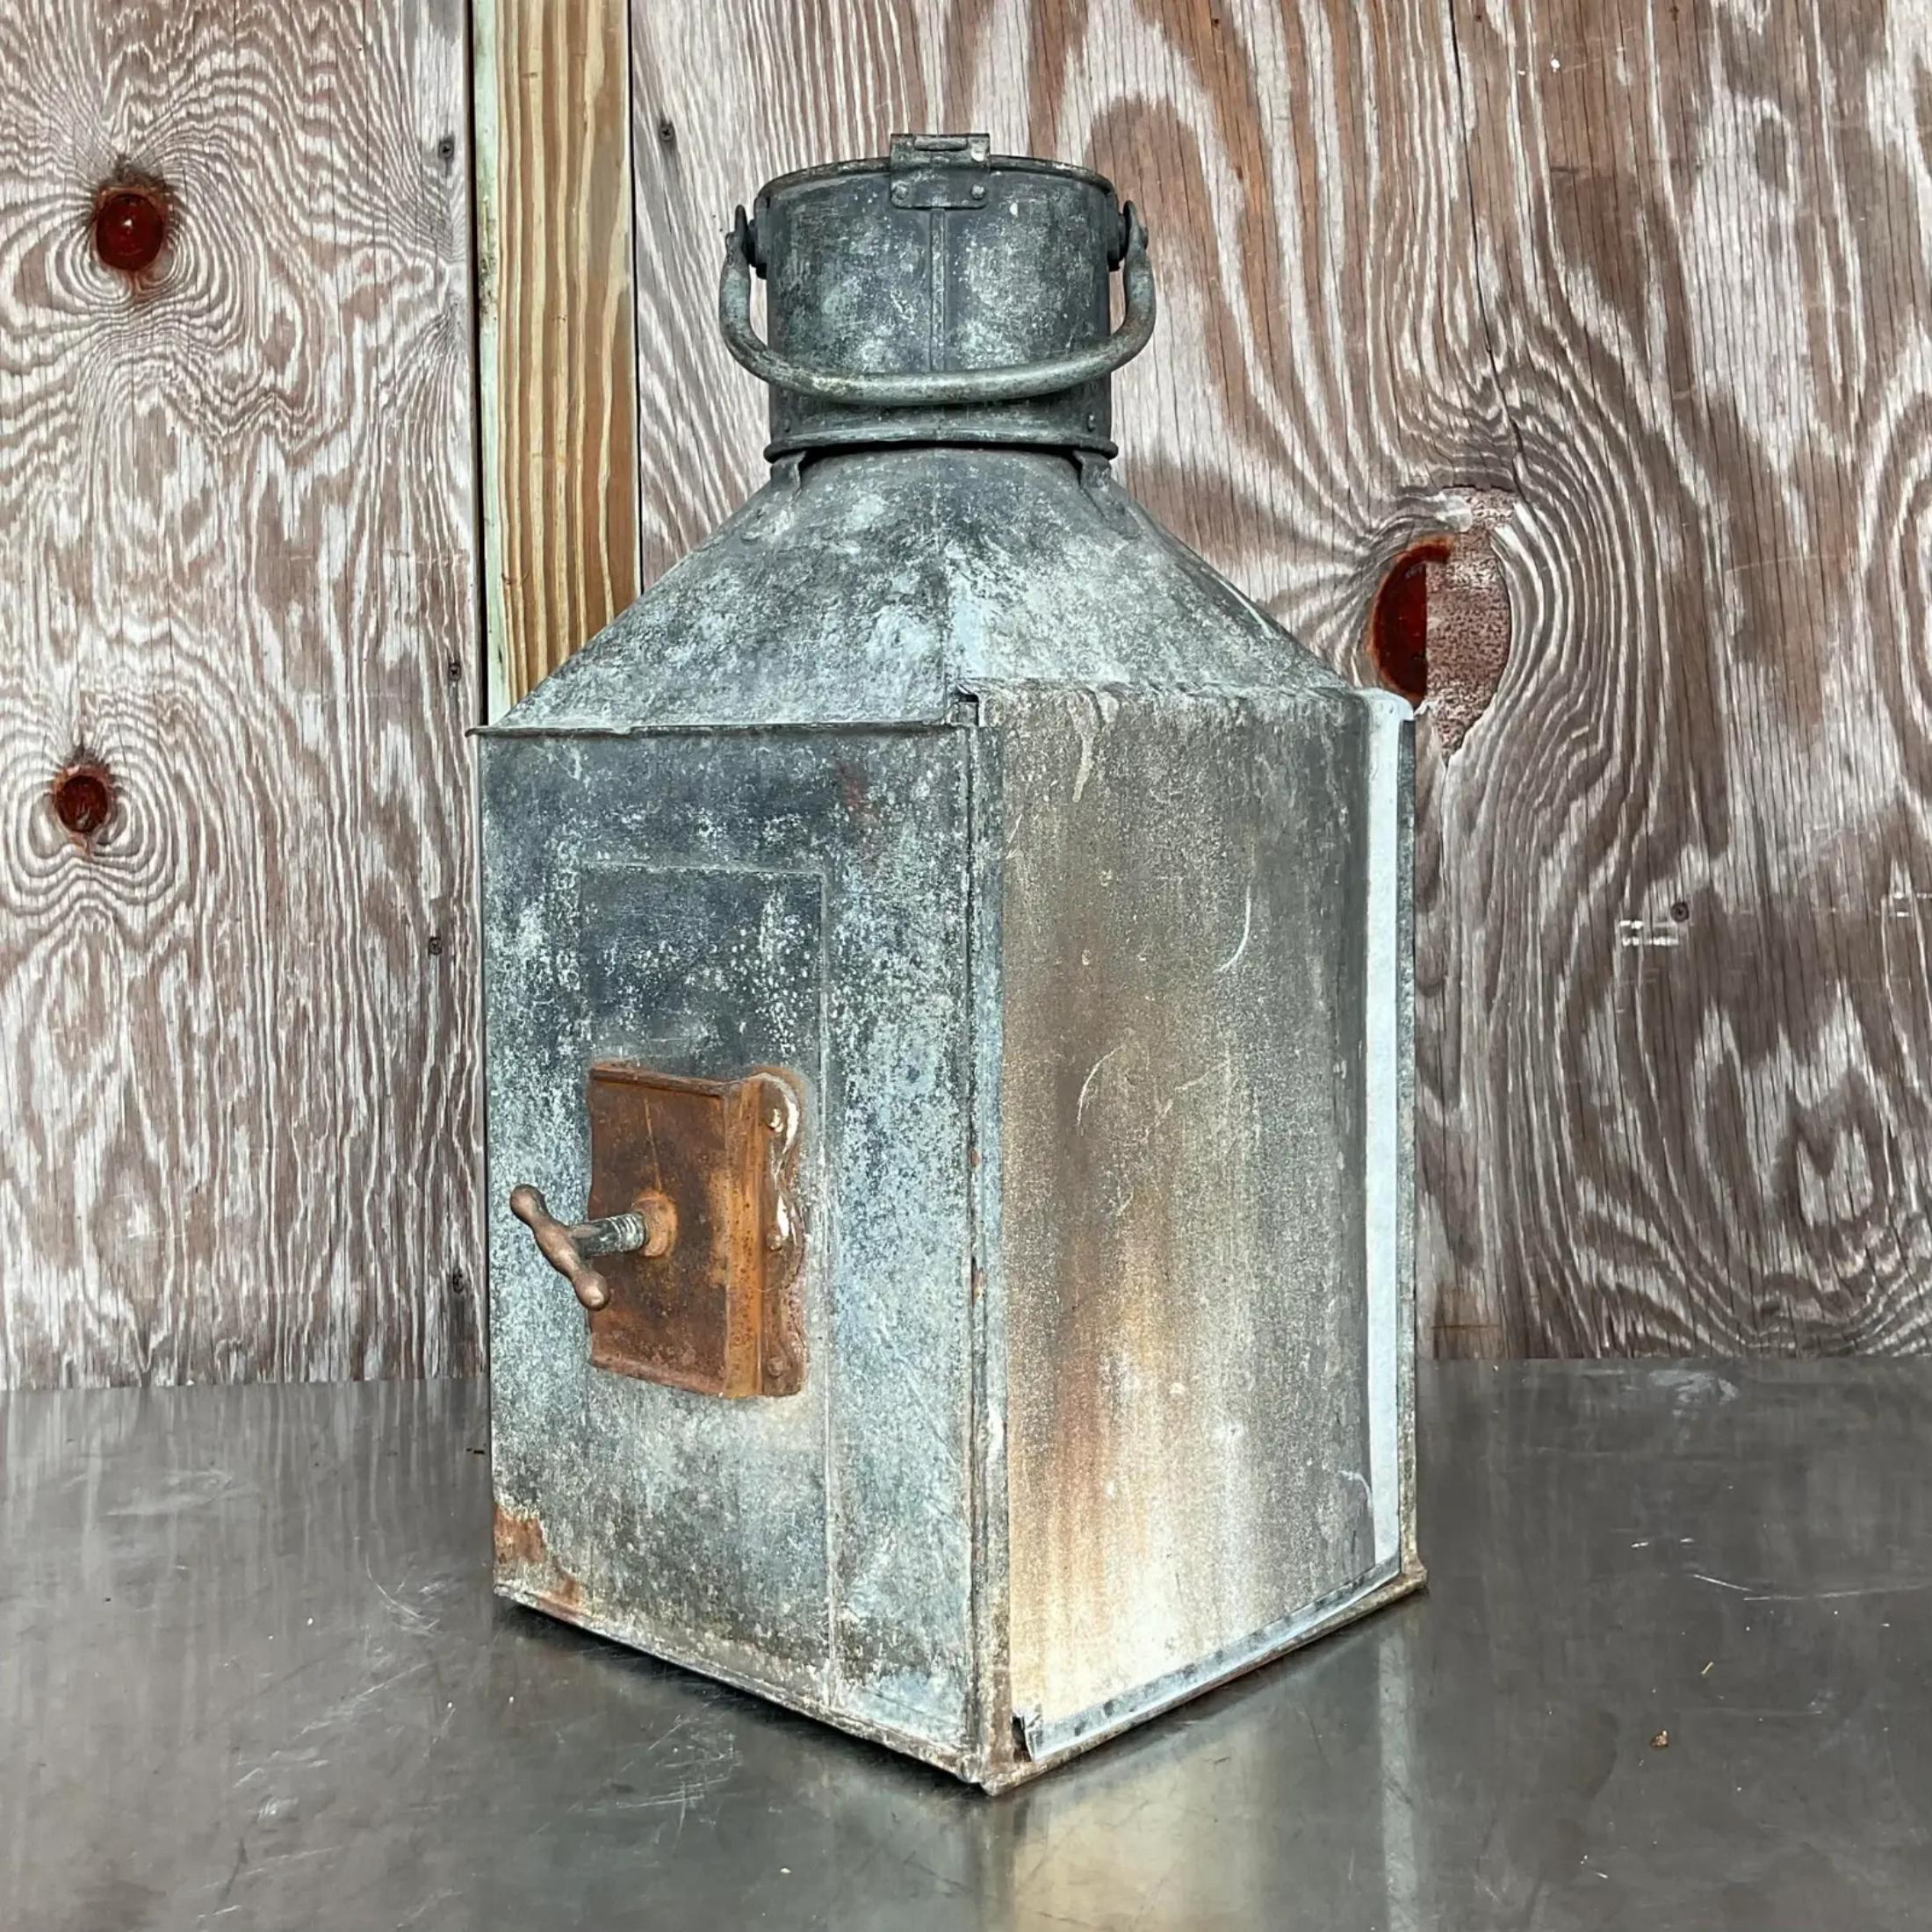 A fabulous vintage Boho ships lantern. Made by the iconic Meteorite group and marked on the top. Beautiful all over patinated finish on a metal frame. Thick glass lens. Acquired from a Palm Beach estate